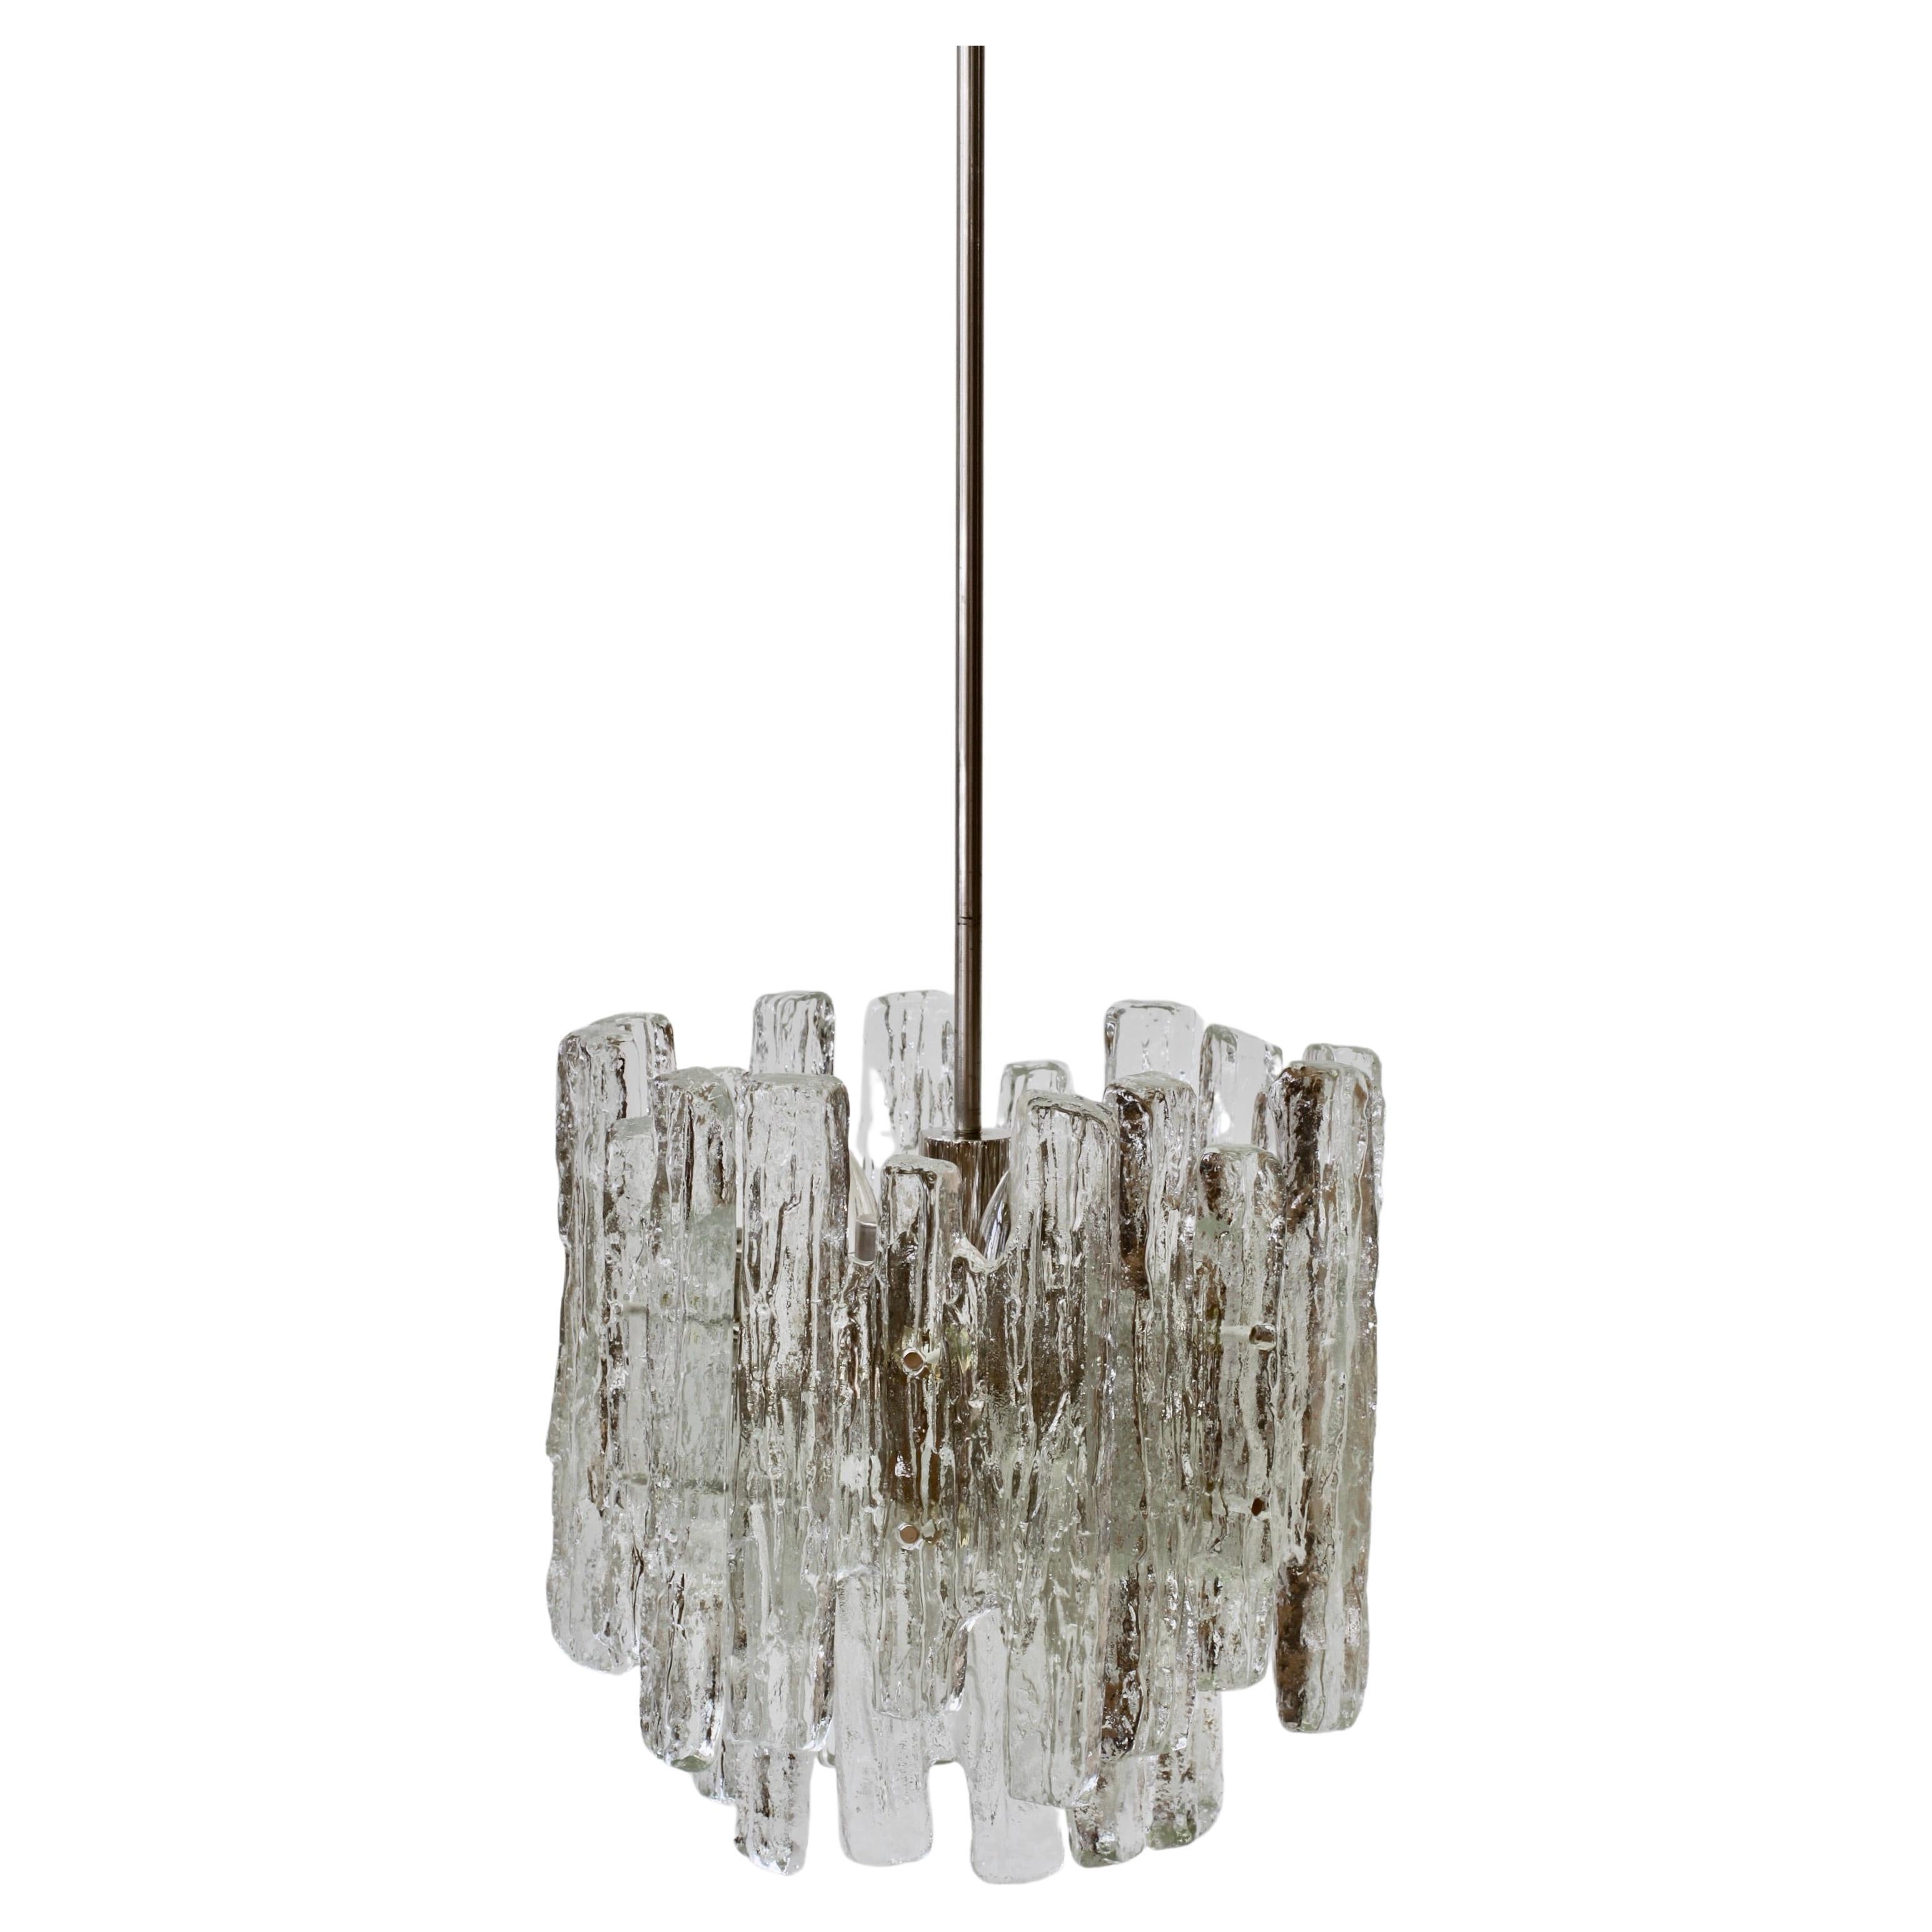 Set of three vintage midcentury Austrian made textured clear ice glass ceiling pendant lights / lamps or chandeliers by Kalmar, circa 1974. Featuring twelve hanging glass elements (six large & six small) resembling melting ice crystals suspended